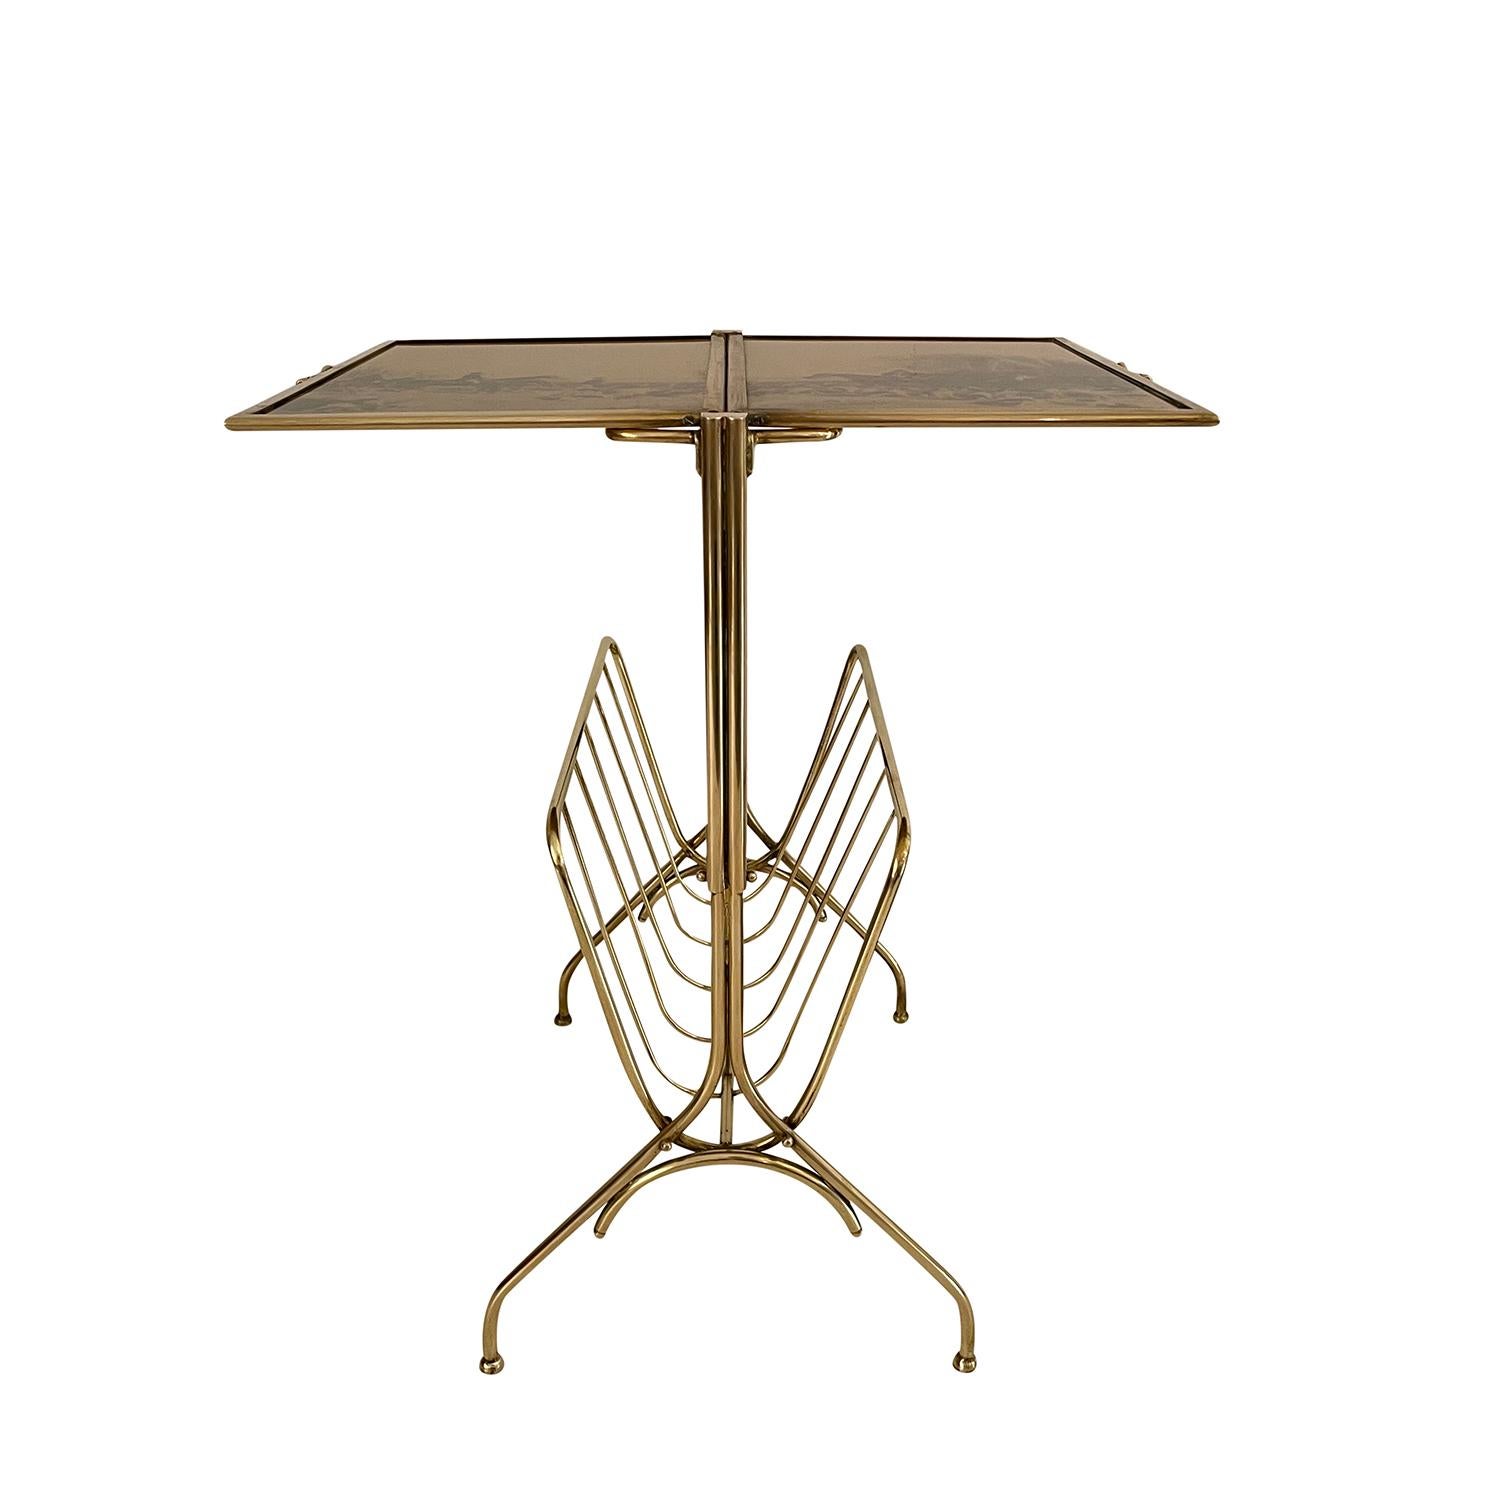 20th Century Italian Modern Brass Folding Side Table - Vintage Magazine Holder In Good Condition For Sale In West Palm Beach, FL